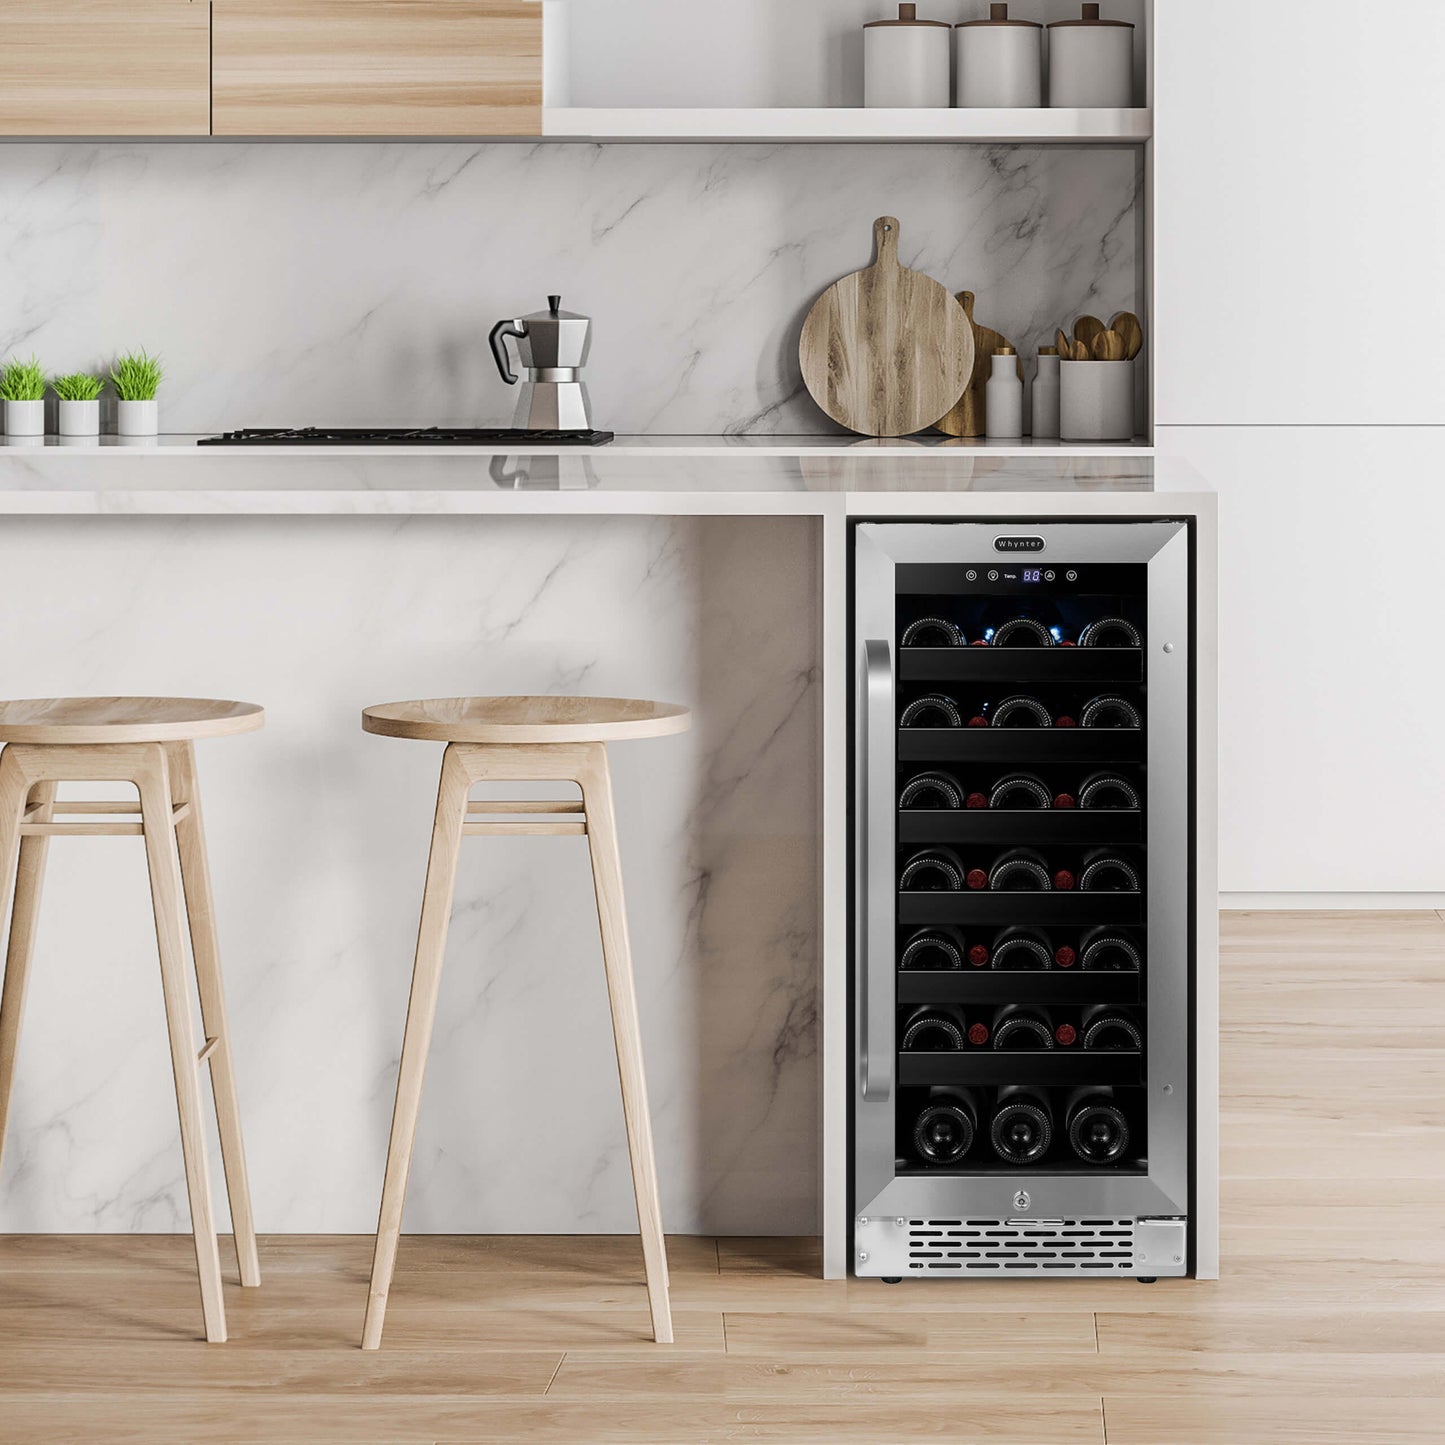 Whynter Wine Refrigerator Whynter BWR-308SB 15 inch Built-In 33 Bottle Undercounter Stainless Steel Wine Refrigerator with Reversible Door, Digital Control, Lock, and Carbon Filter